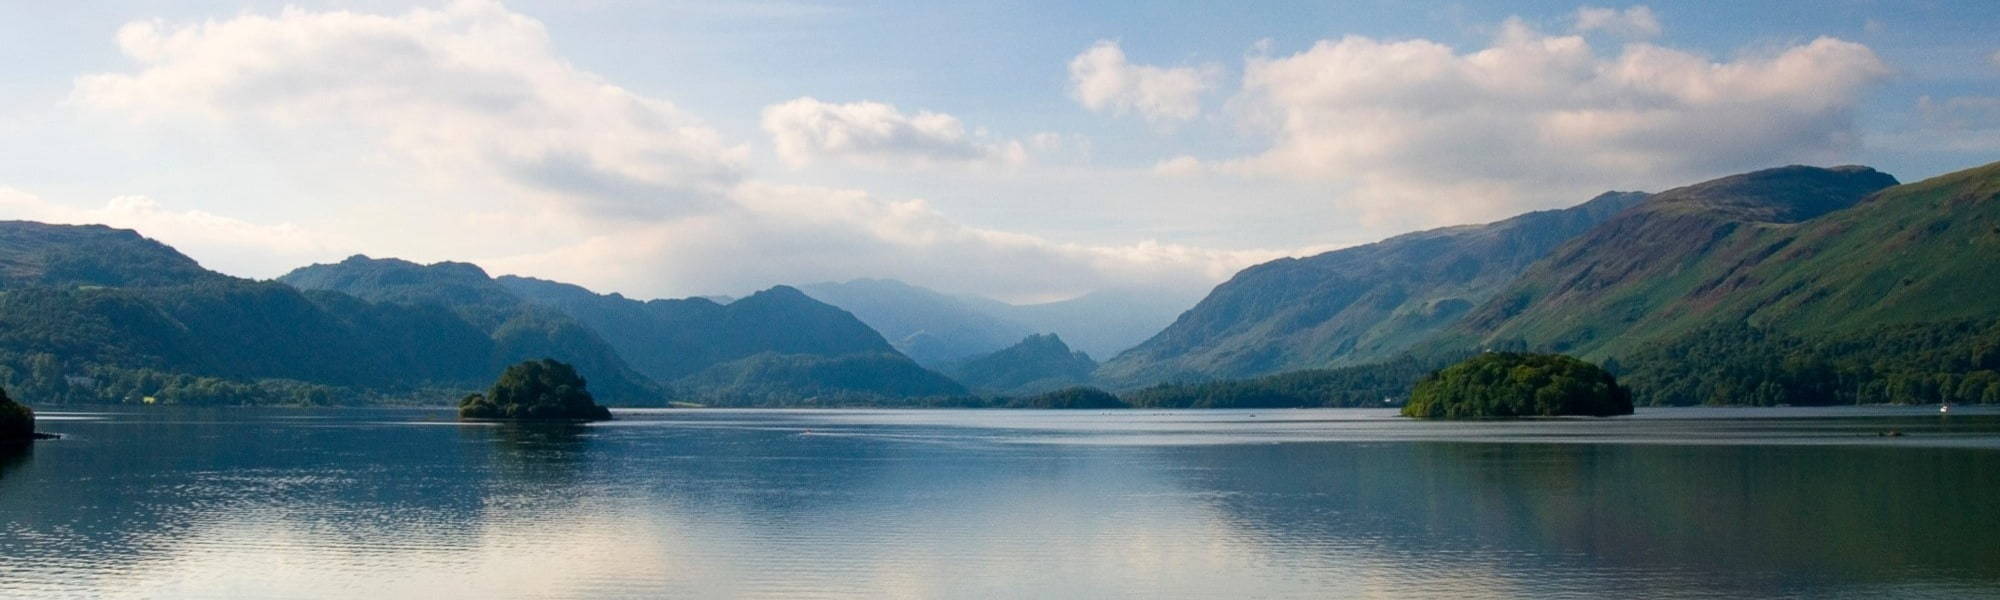 an image of a lake in Cumbria